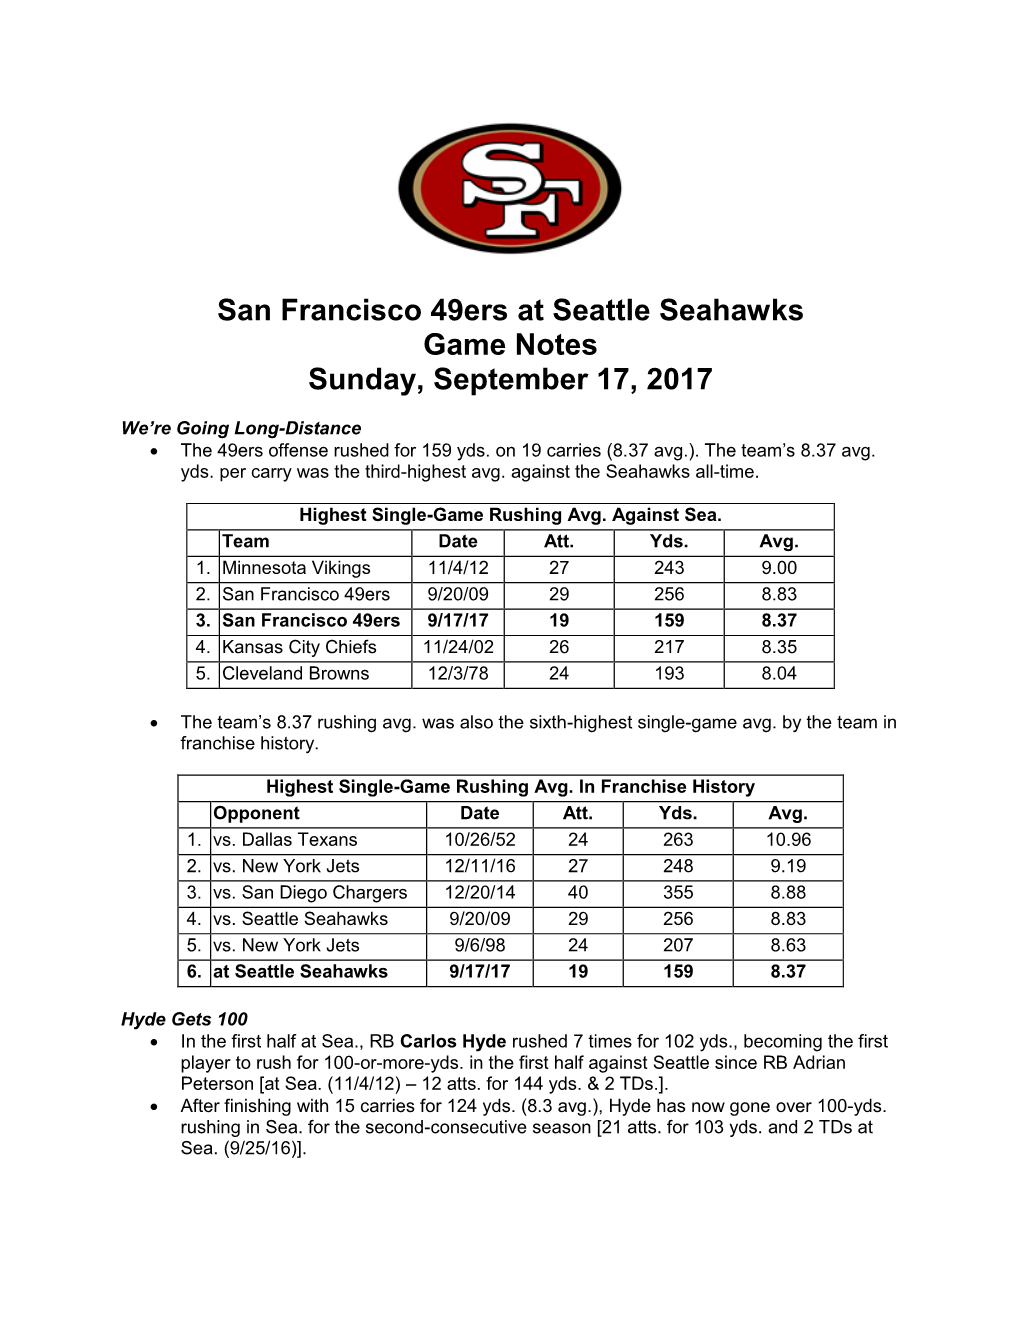 San Francisco 49Ers at Seattle Seahawks Game Notes Sunday, September 17, 2017